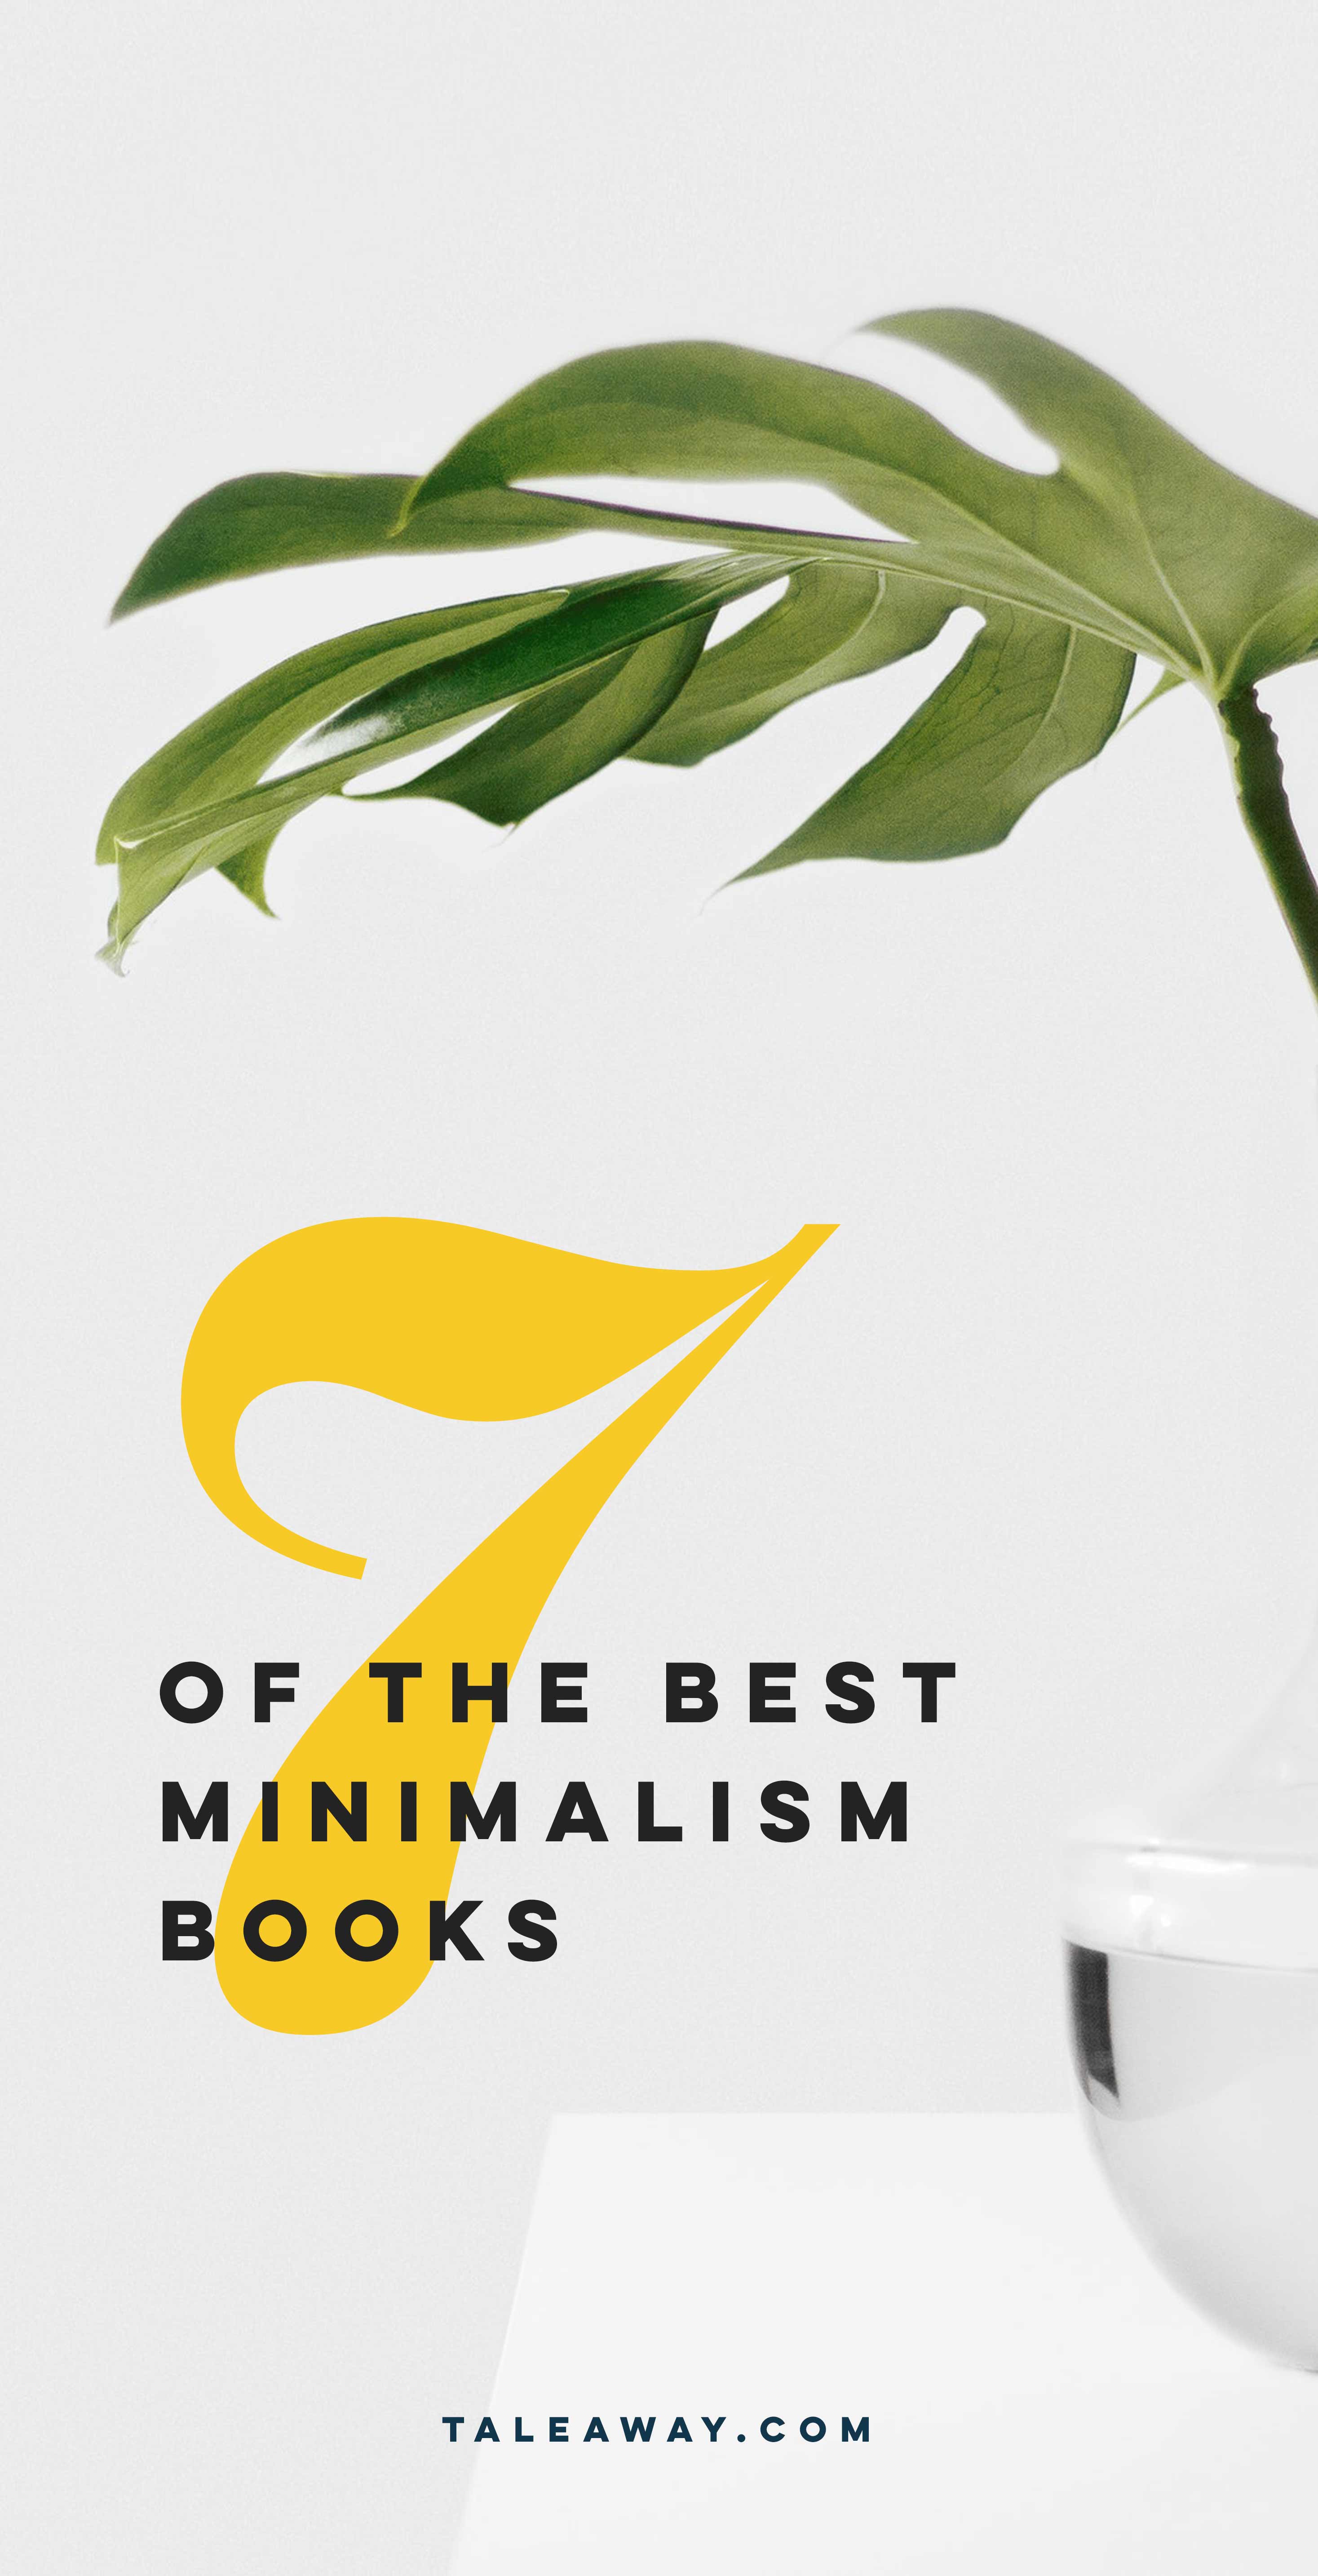 7 Best Minimalism Books - Books about minimalism for people who love reading. For more book ideas visit www.taleway.com to find books set around the world. Ideas for those who like to travel, both in life and in fiction. minimalism, books, minimalism books, how to become minimalist, minimalism lifestyle, minimalism home, minimalism for beginners, minimalism guide, minimalism how to, minimalism inspiration, books about minimalism